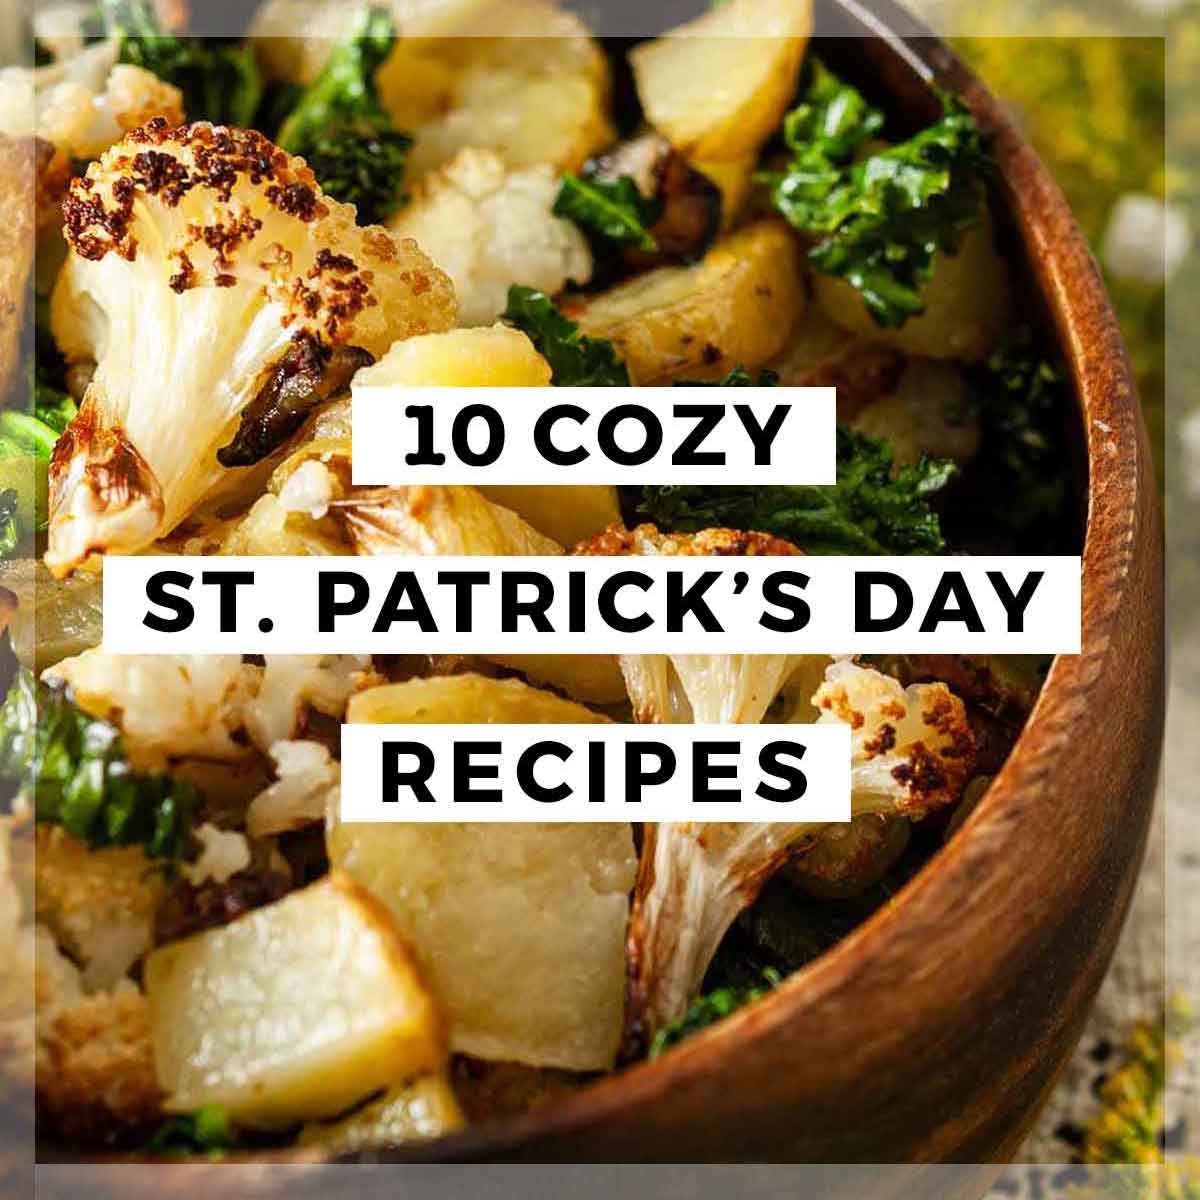 A bowl of potato hash with a title that says "10 Cozy St. Patrick's Day Recipes."